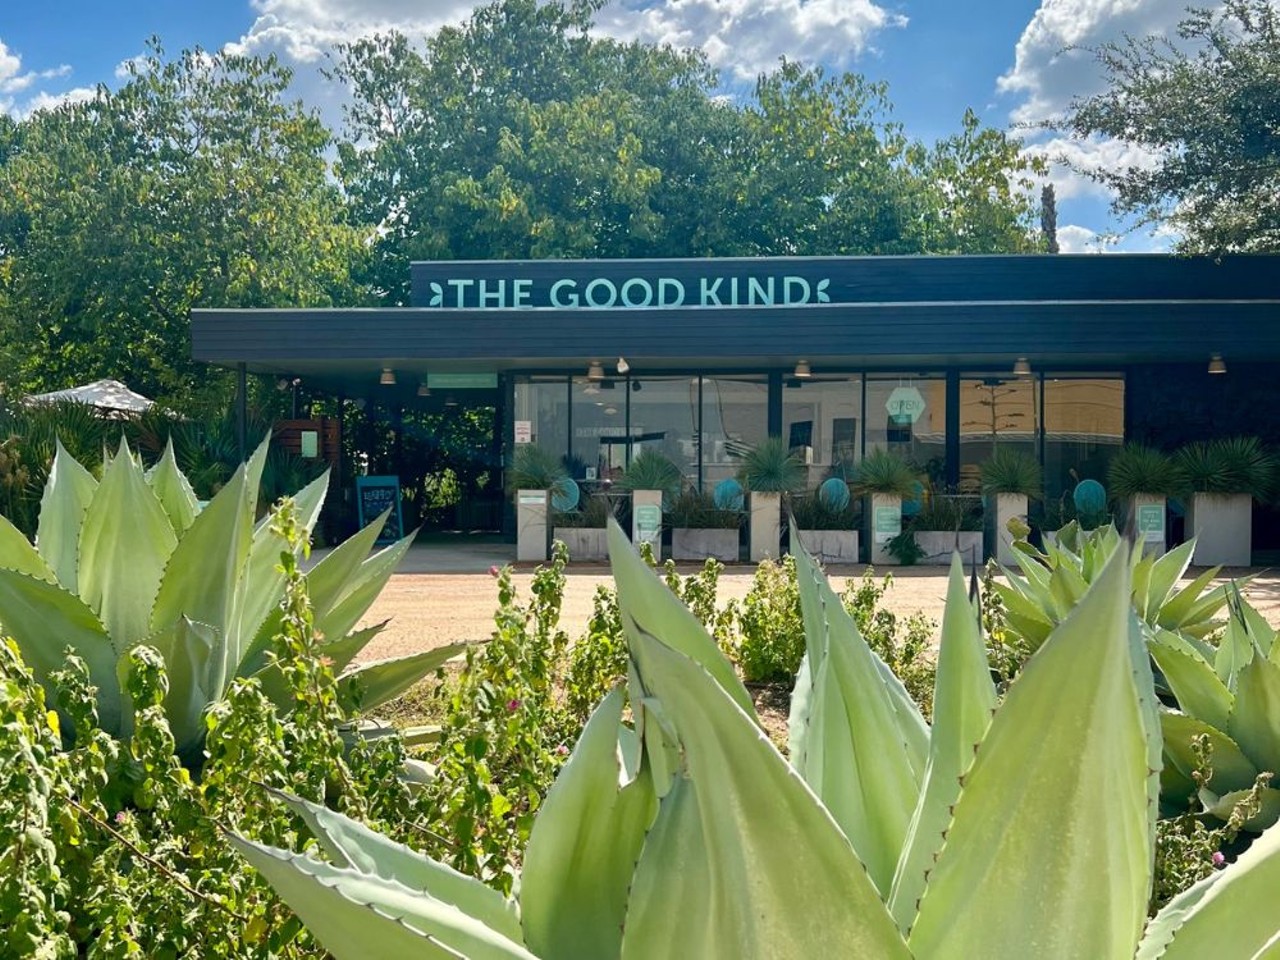 The Good Kind Southtown
1127 S. St. Mary's St., (210) 801-5892, eatgoodkind.com
The Good Kind guarantees fresh and local whenever possible, so you can enjoy the fresh air of the garden-like outdoor dining area knowing what you're eating is fresh, too. Check the calendar before your trip and you could catch yoga, pop-ups, trivia and more.